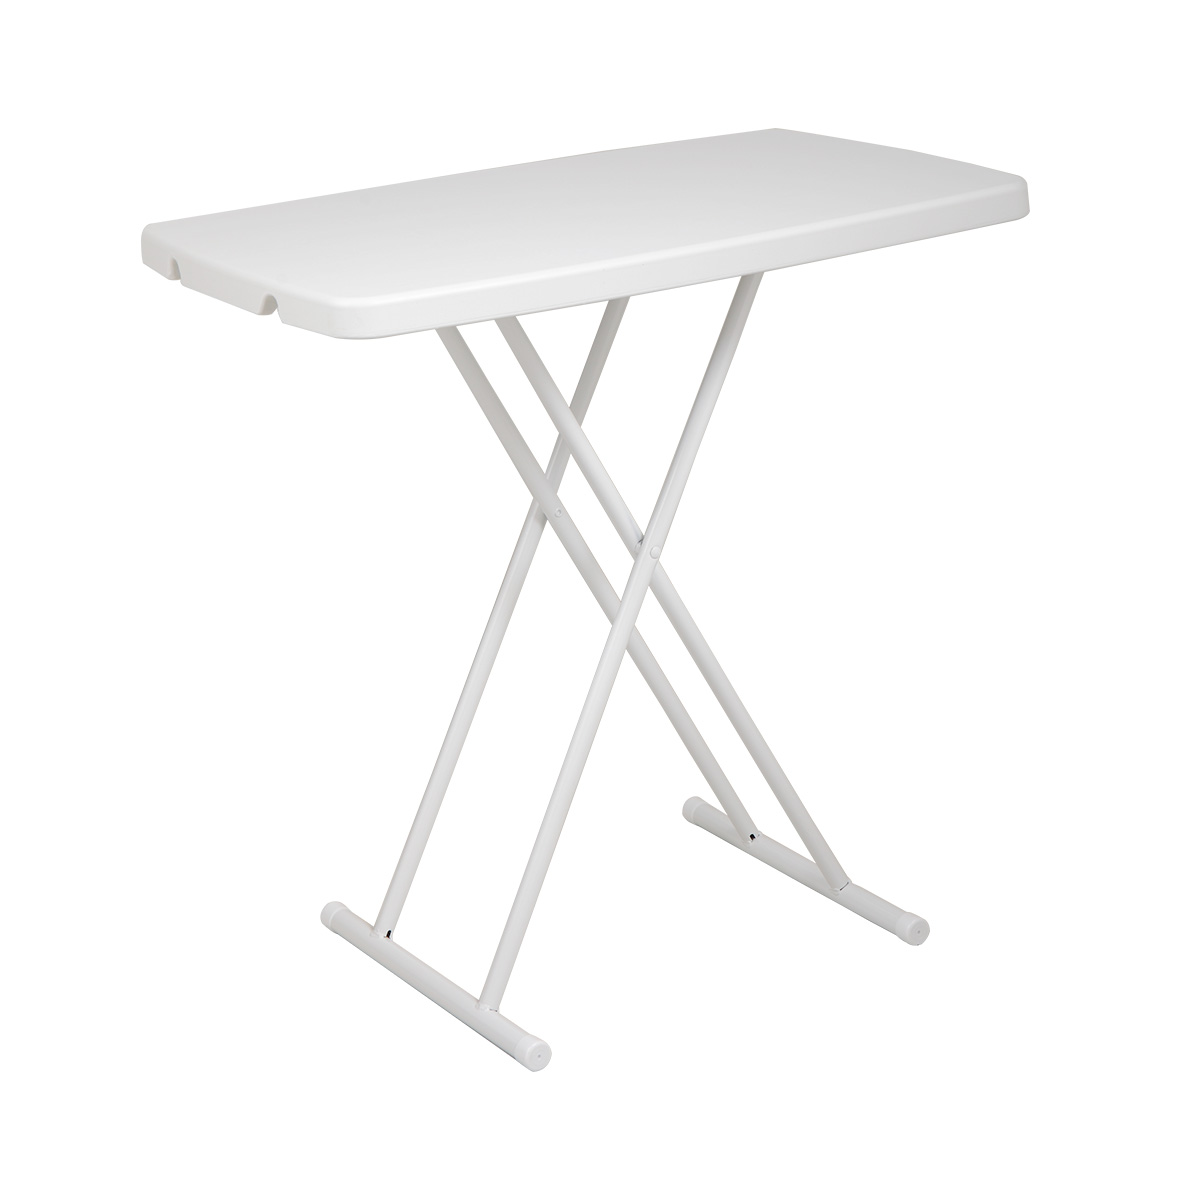 Folding Table Writing Desk with Adjustable Height for Study Office Home Use-CASAINC